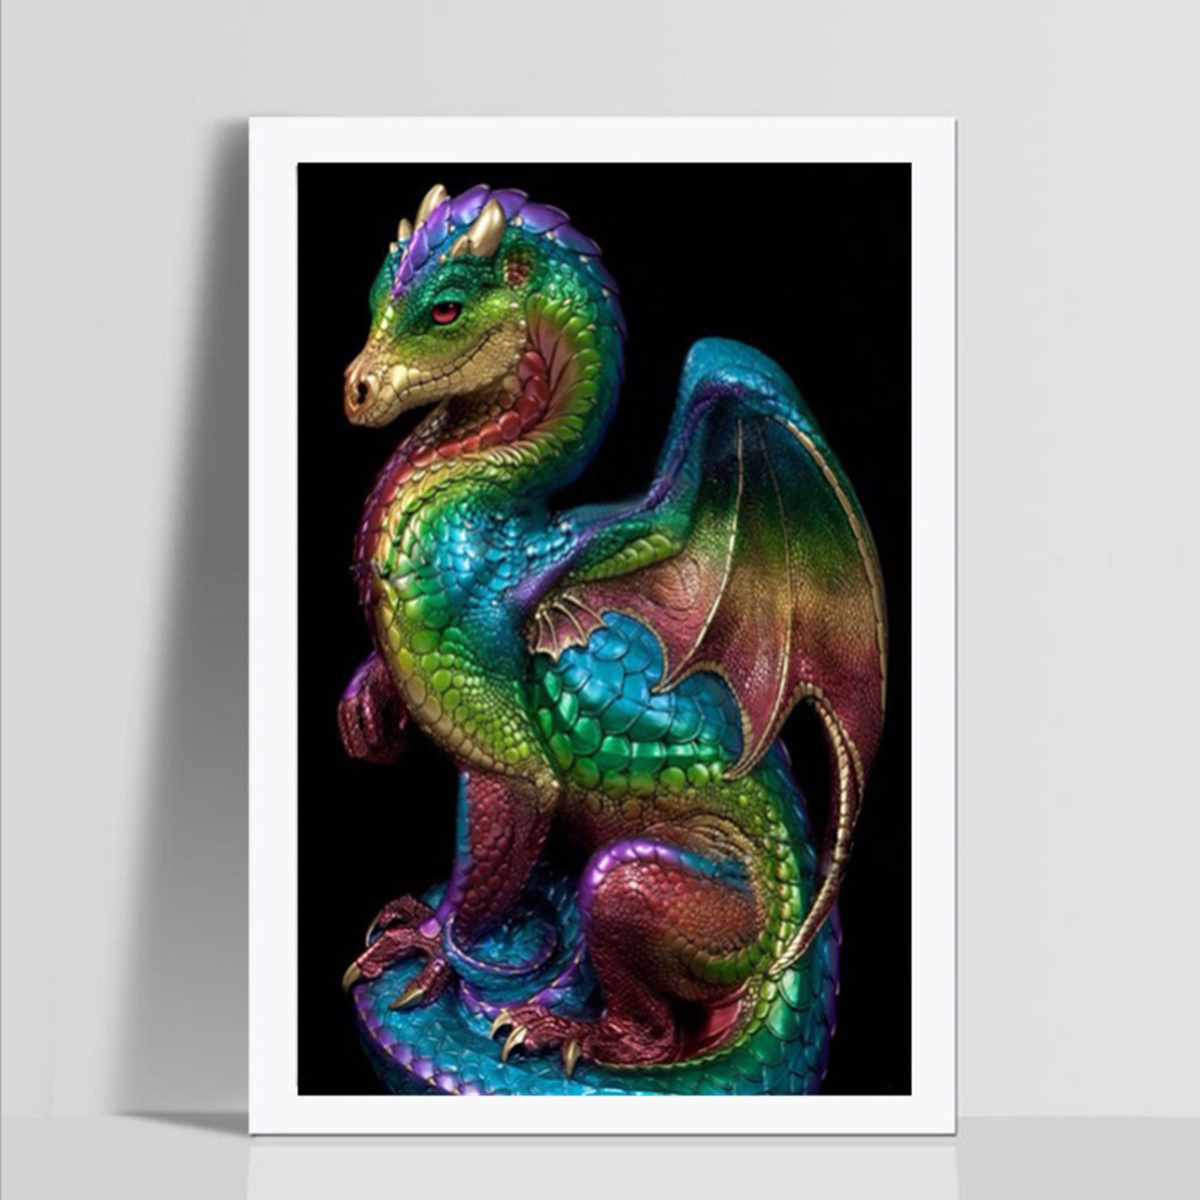 5D-DIY-Diamond-Painting-Dragon-Monster-Art-Craft-Kit-Handmade-Wall-Decorations-Gifts-for-Kids-Adult-1702867-5